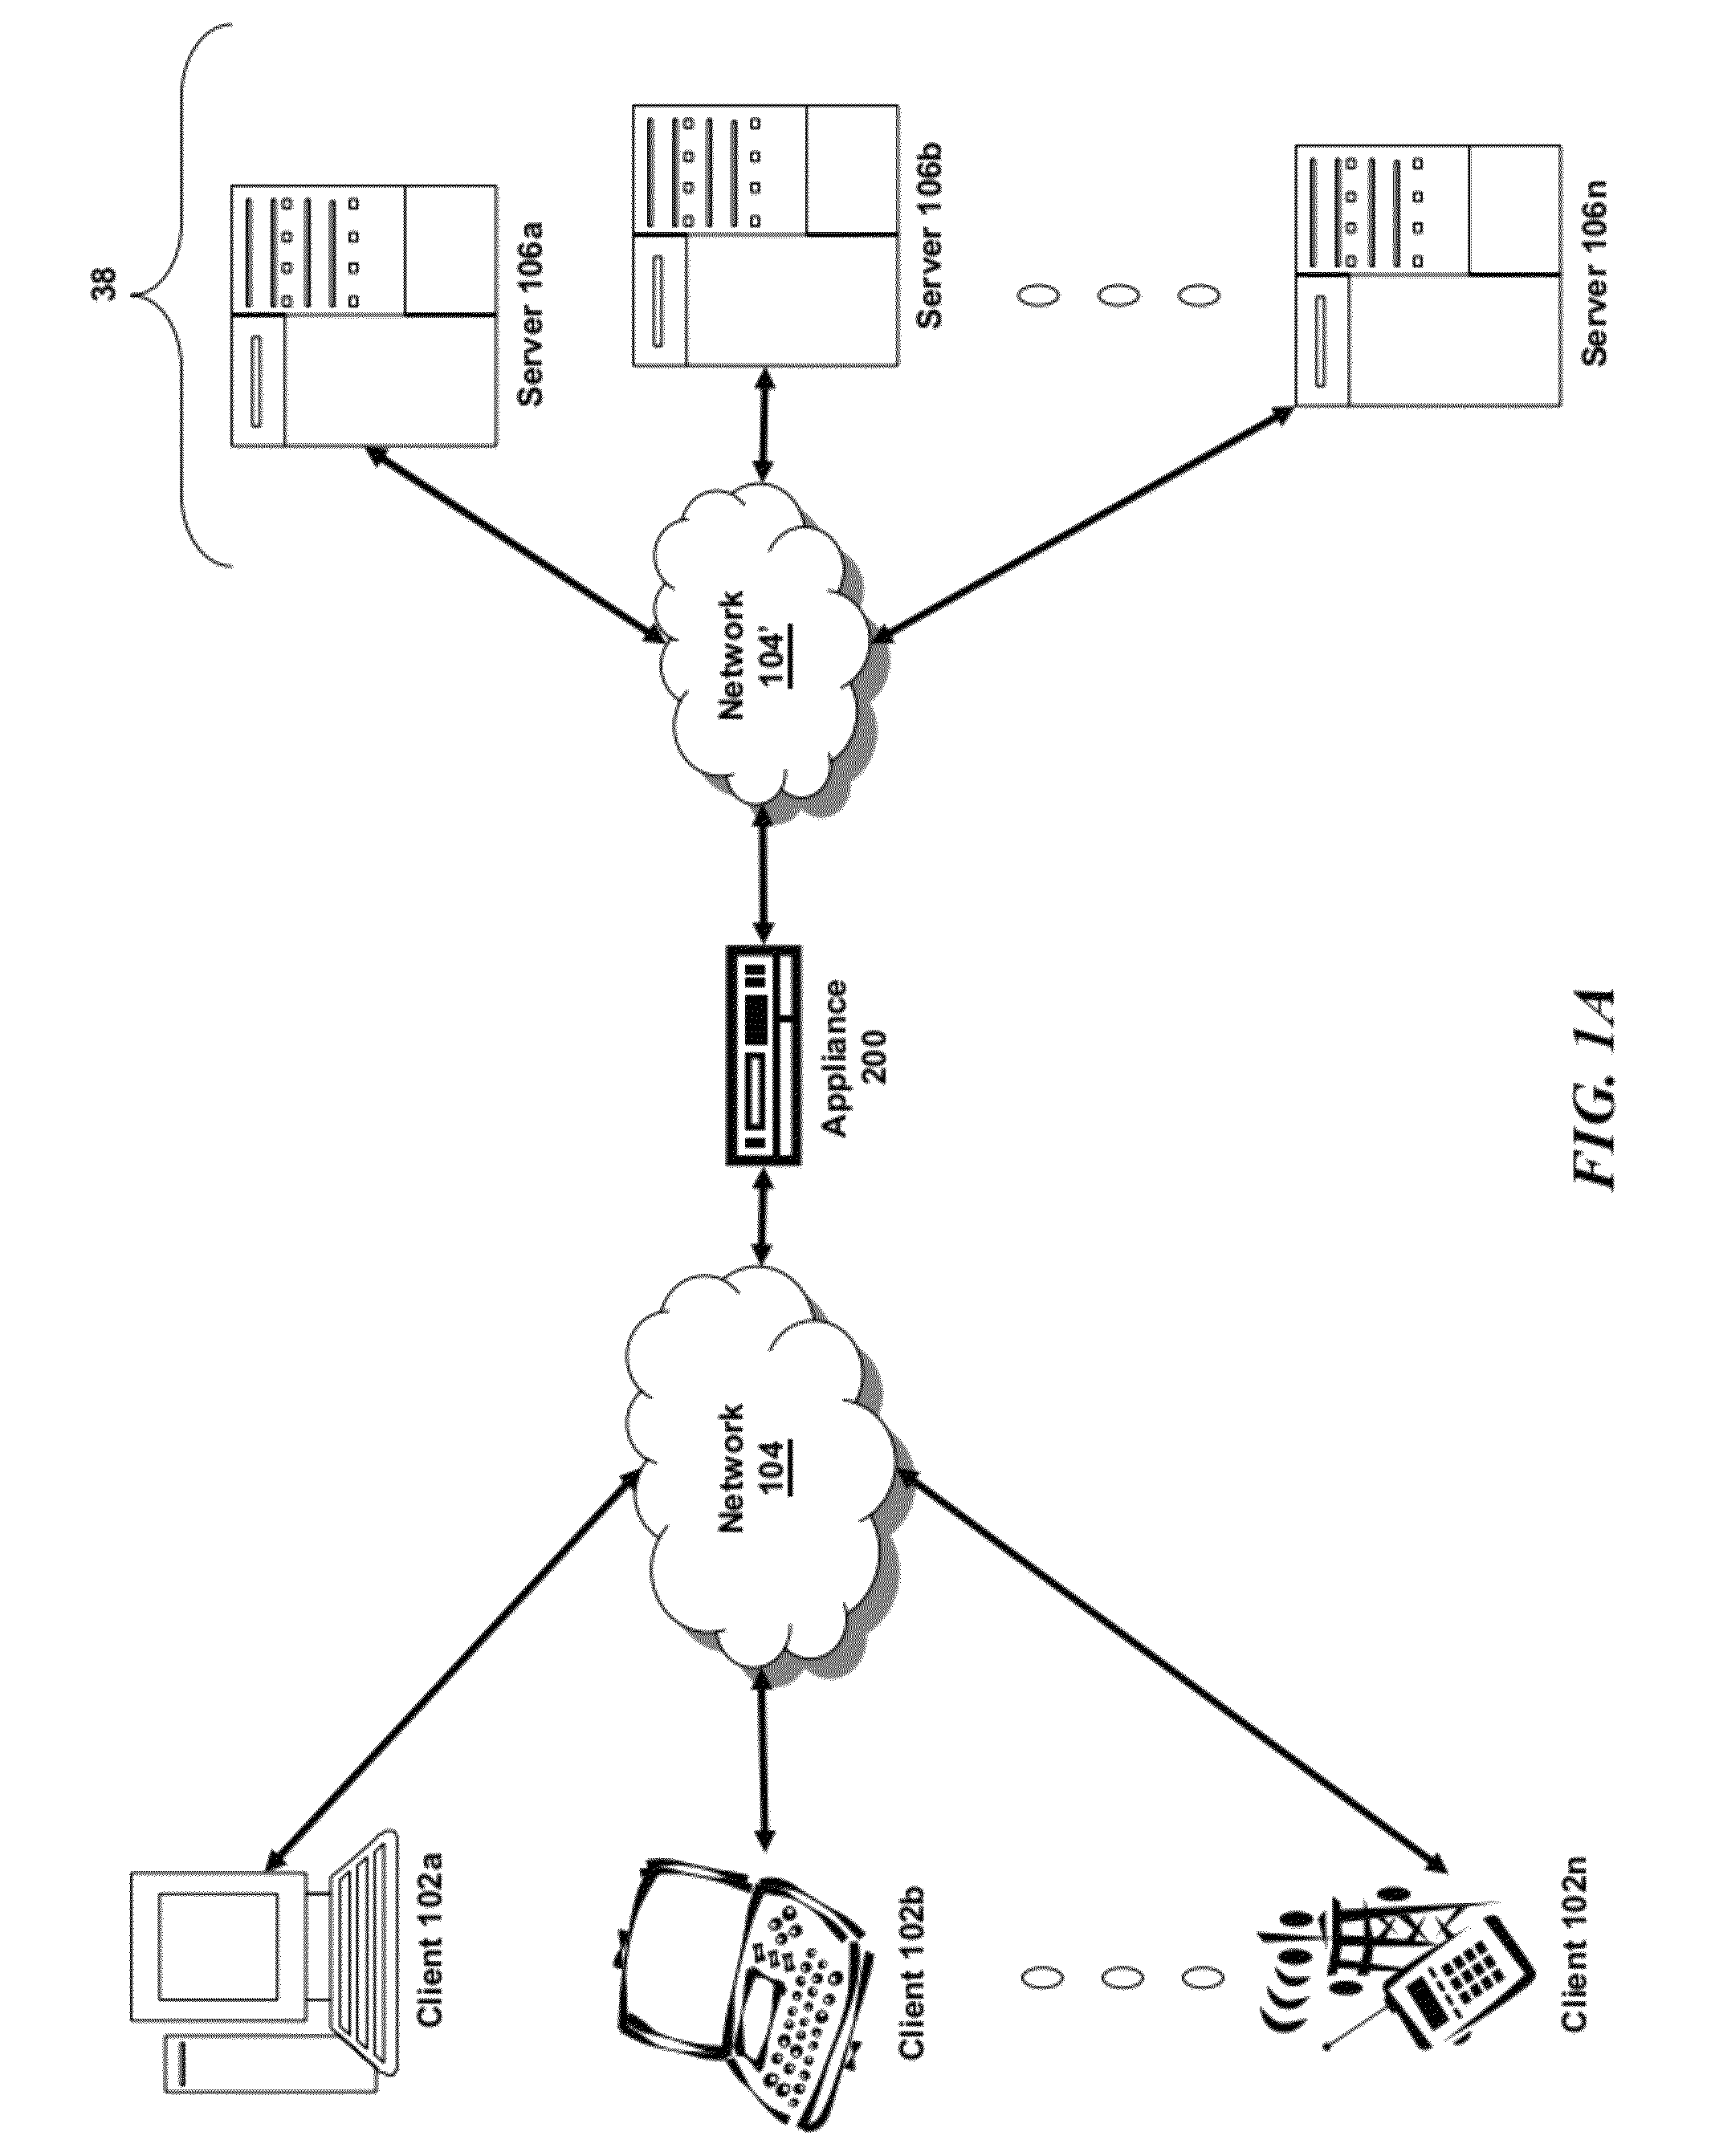 Systems and methods for policy based routing for multiple next hops